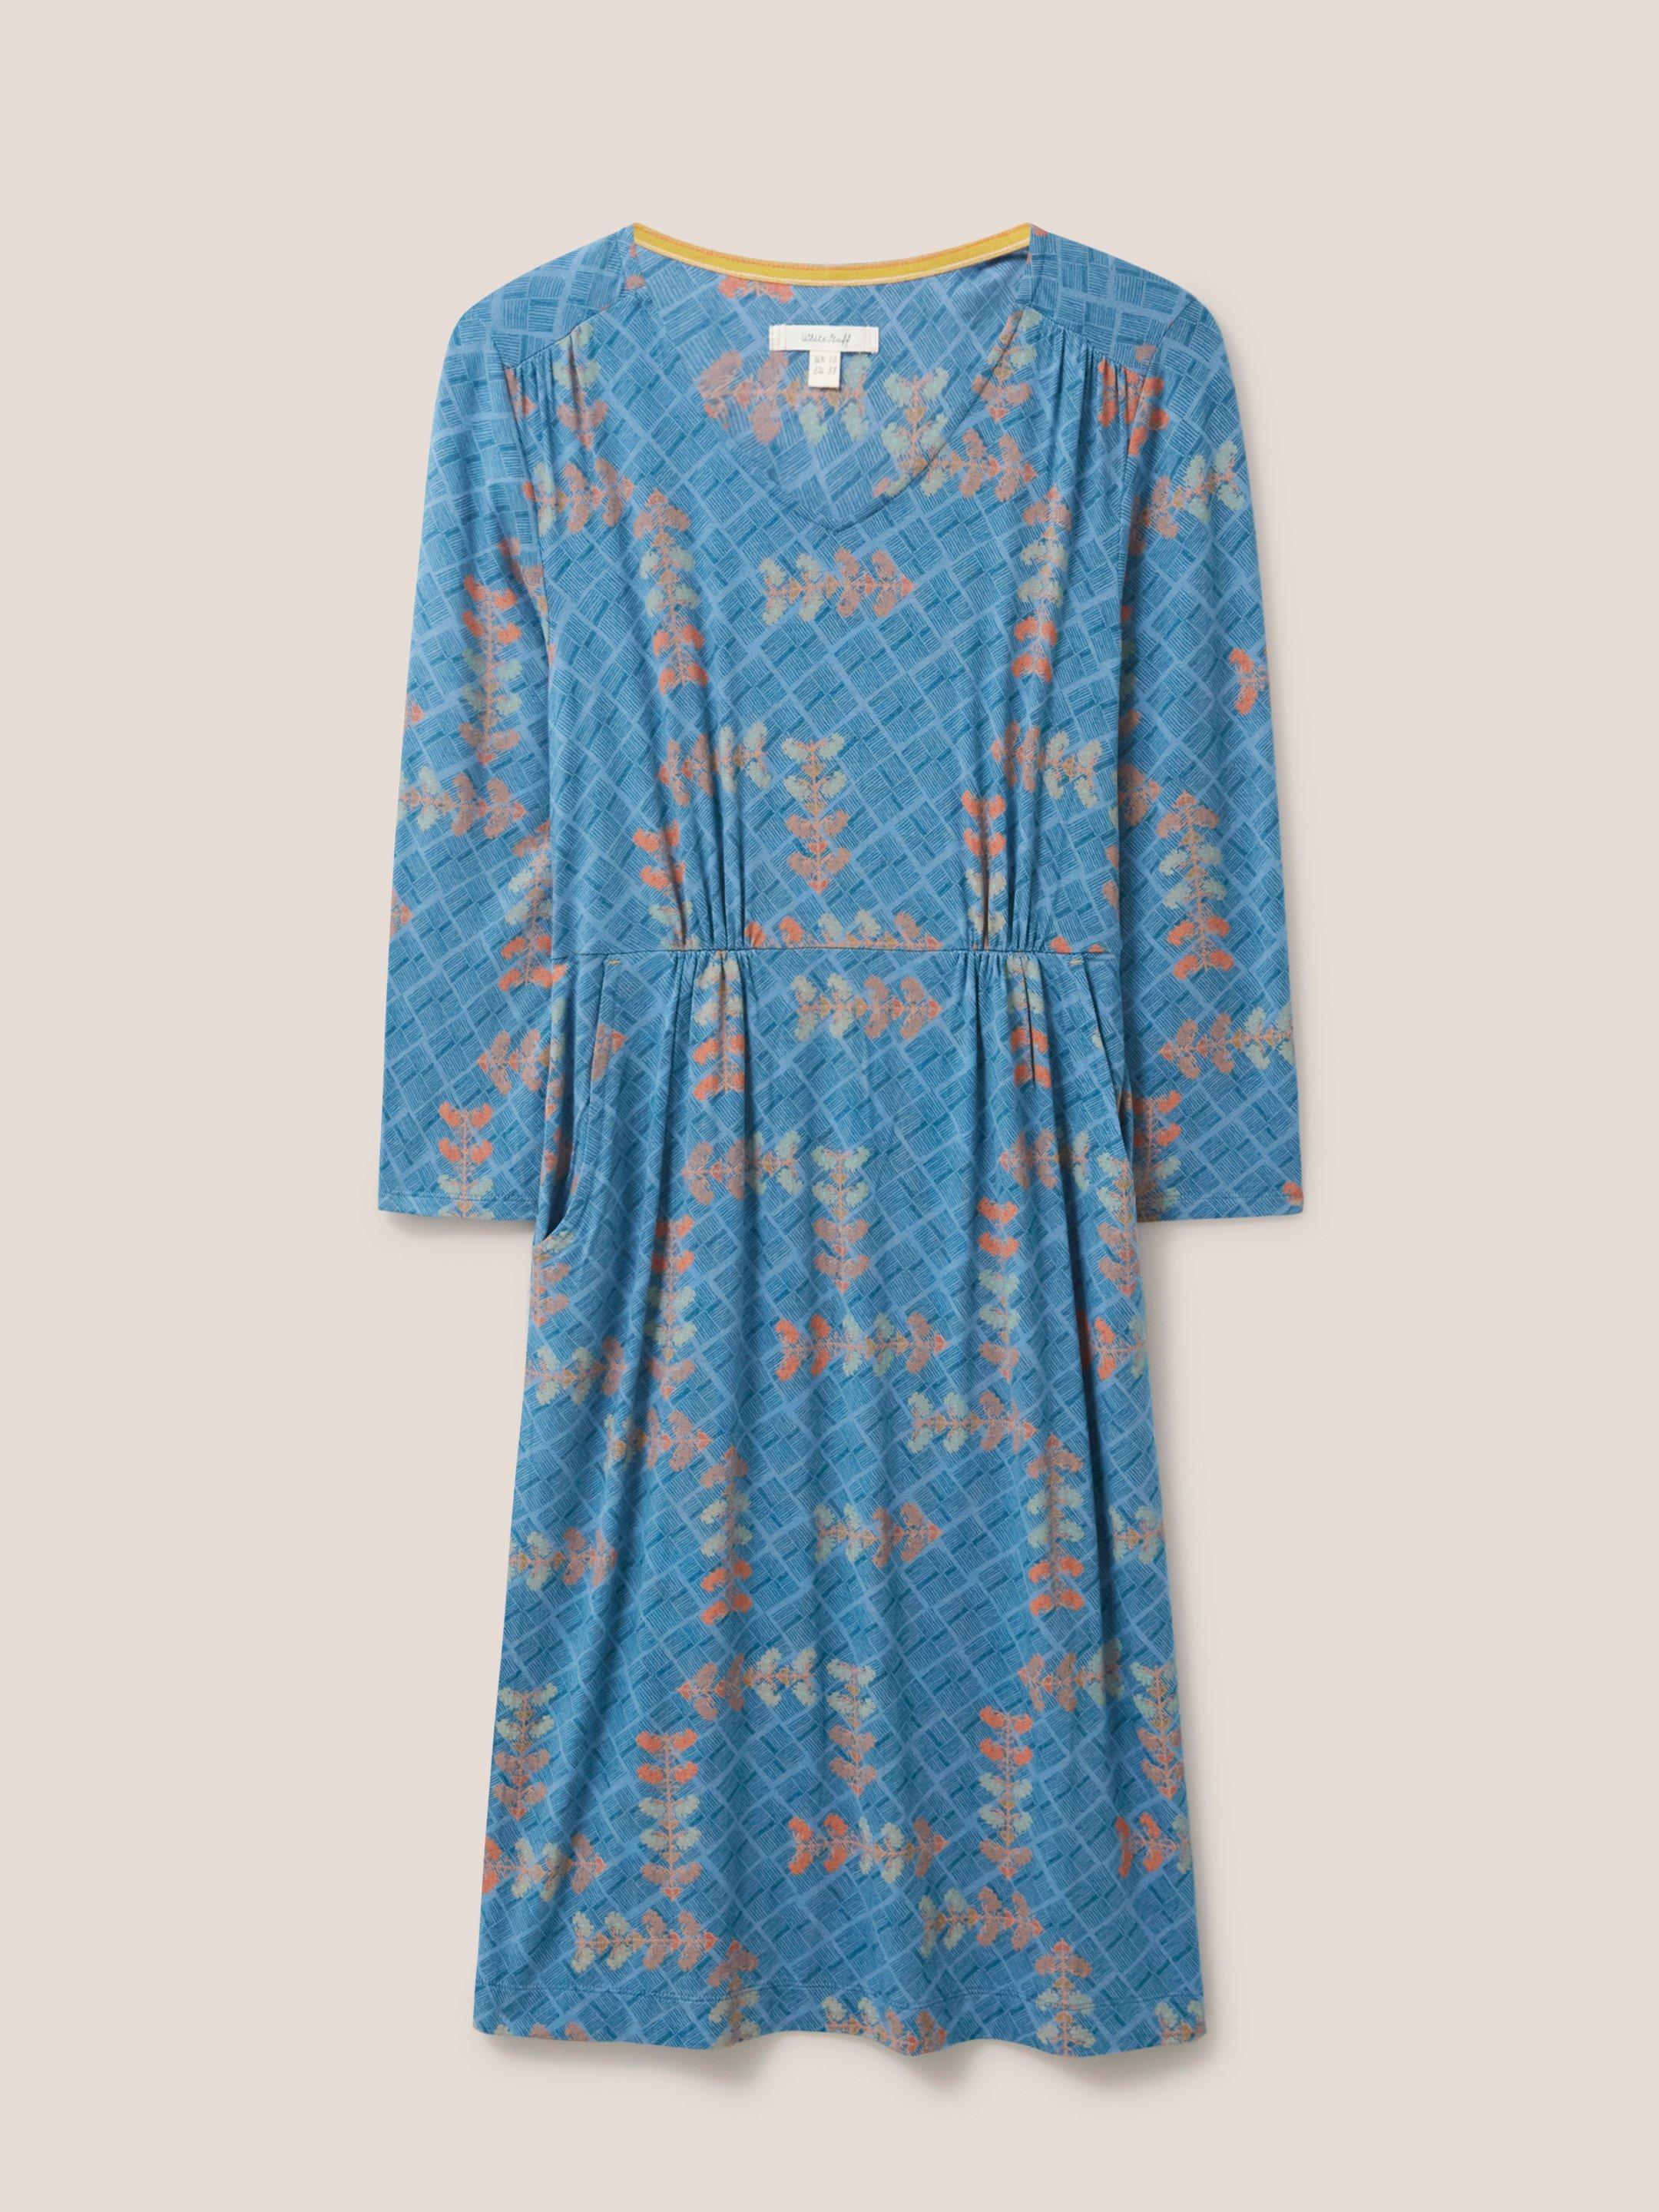 Tallie Eco Vero Jersey Dress in TEAL MLT - FLAT FRONT